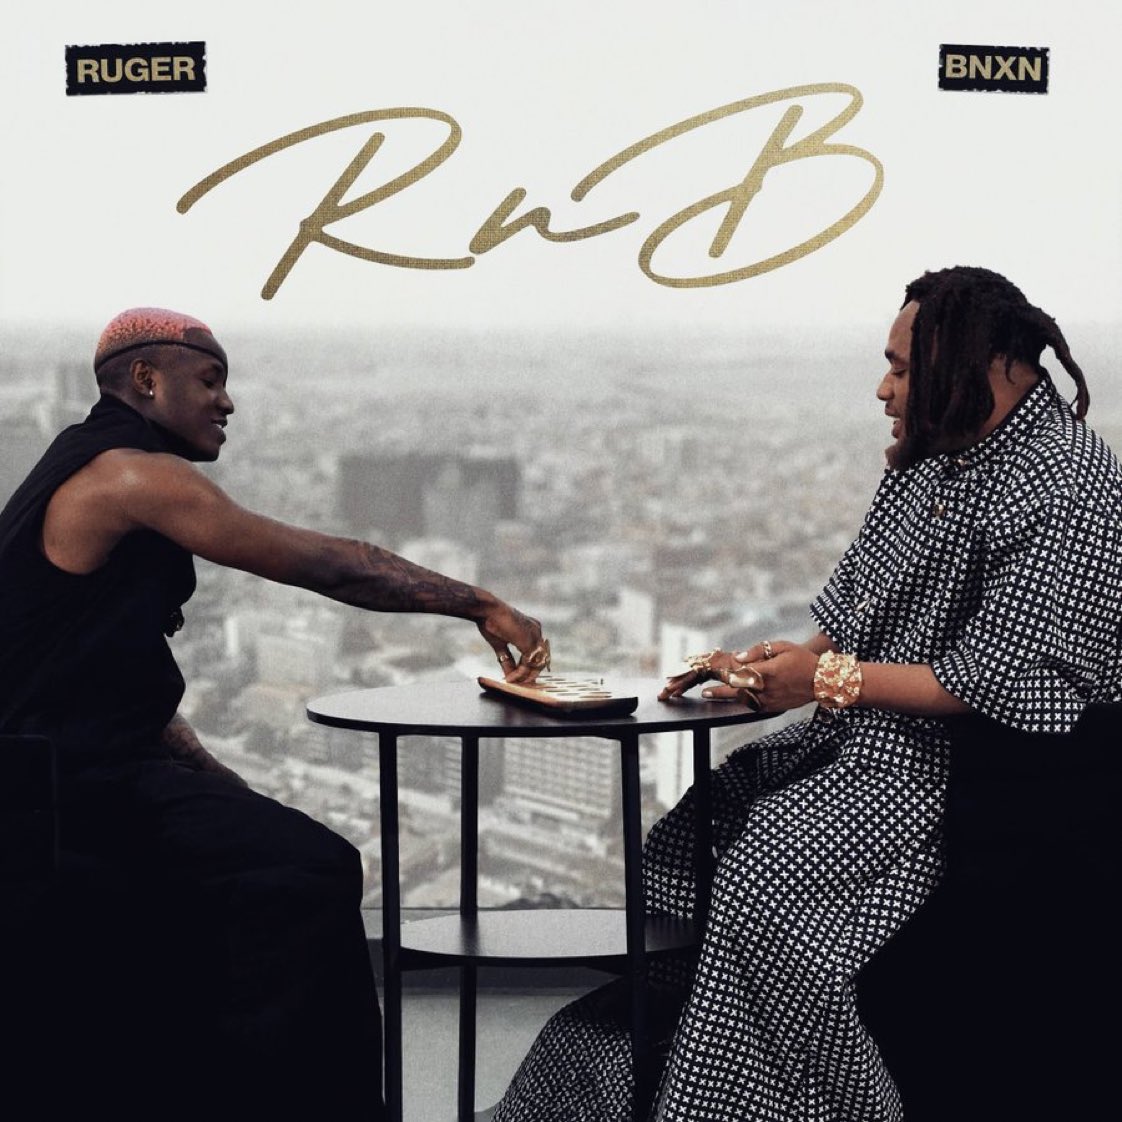 Ruger x Bnxn’s ‘RnB’ has reached #1 on Apple Music in 3 countries:

- Nigeria 🇳🇬 
- Gambia 🇬🇲 
- Sierra Leone 🇸🇱